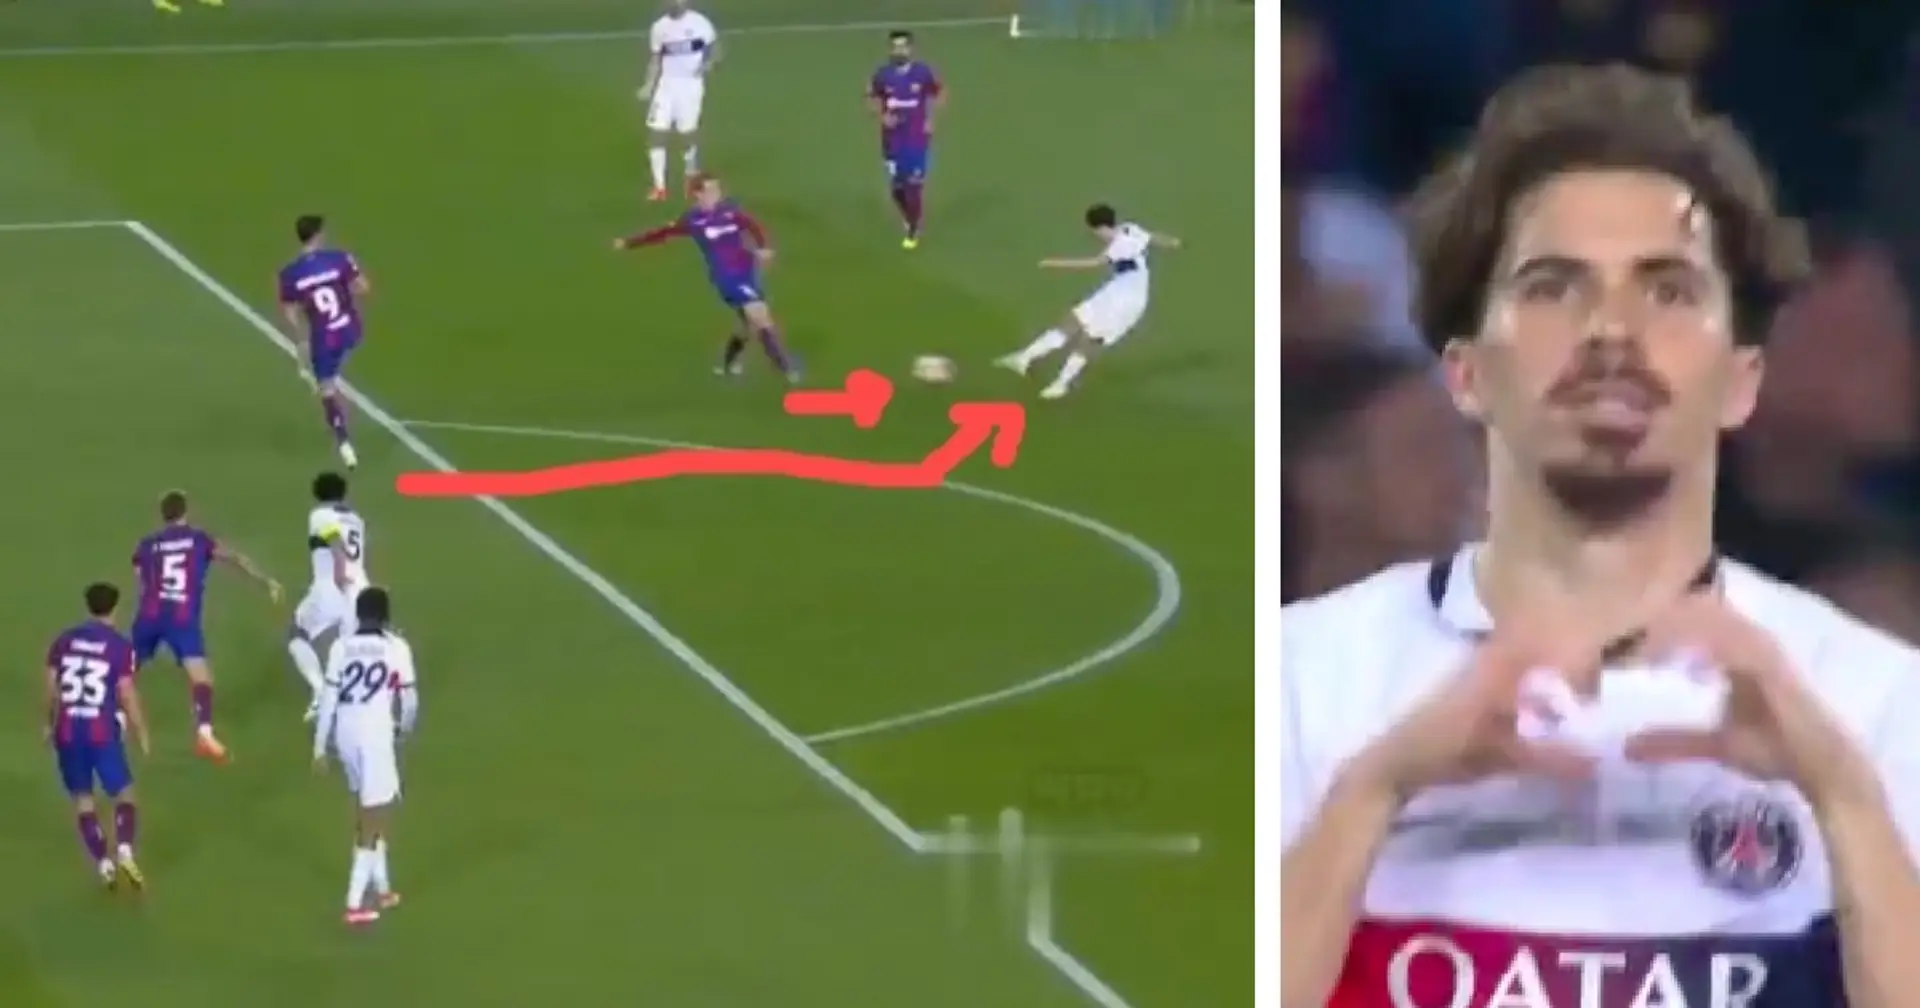 Revealed: Two players who should be blamed for PSG second goal 